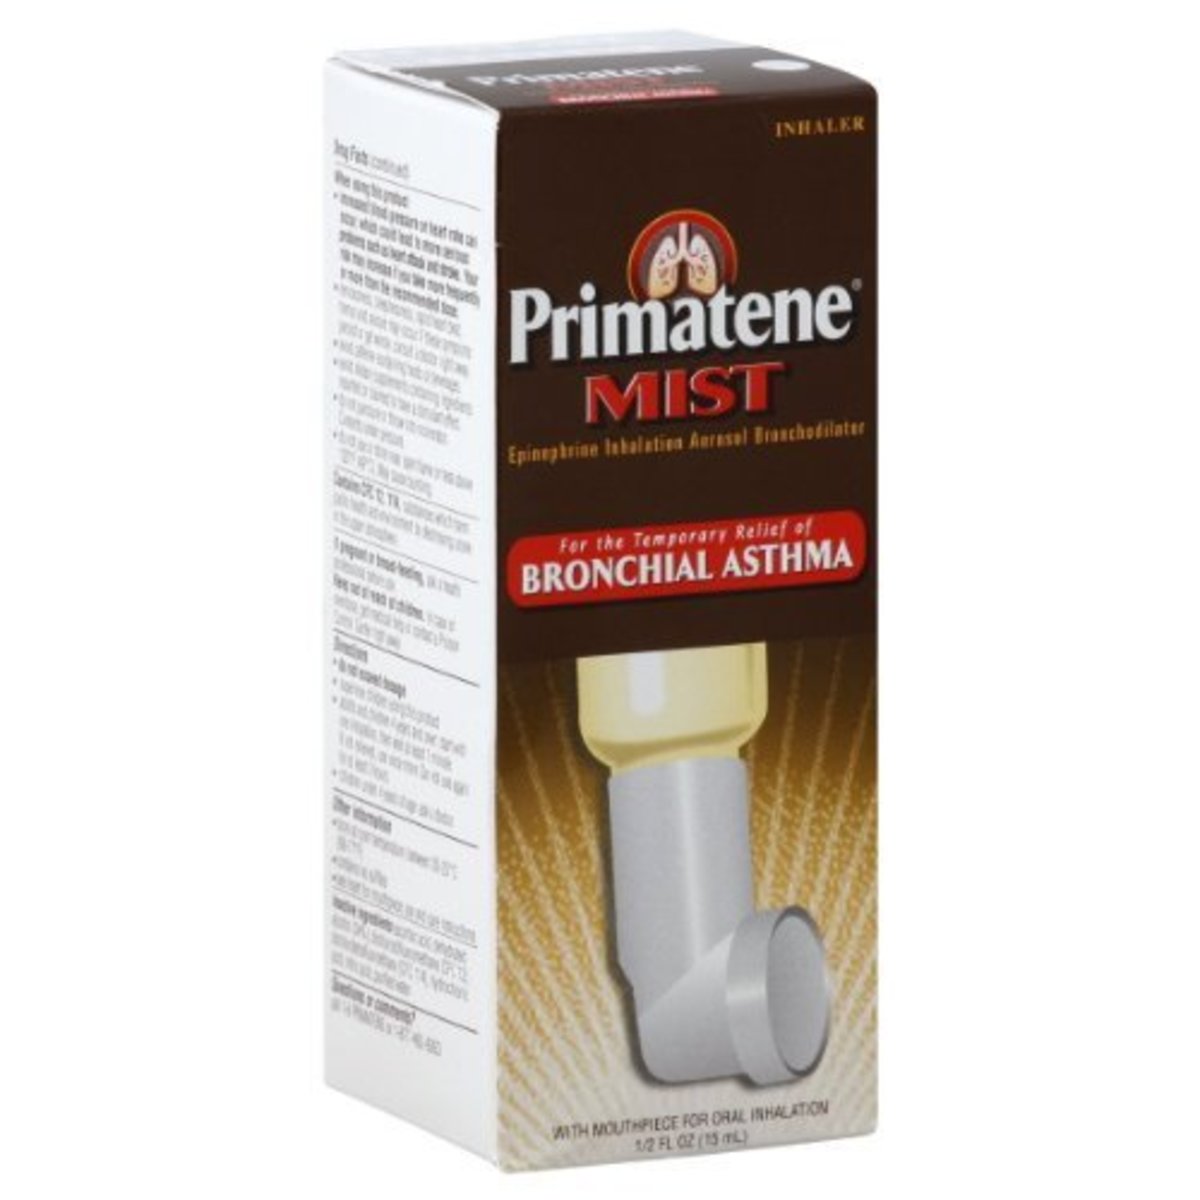 When Will Primatene Mist Asthma Inhaler Be Available?